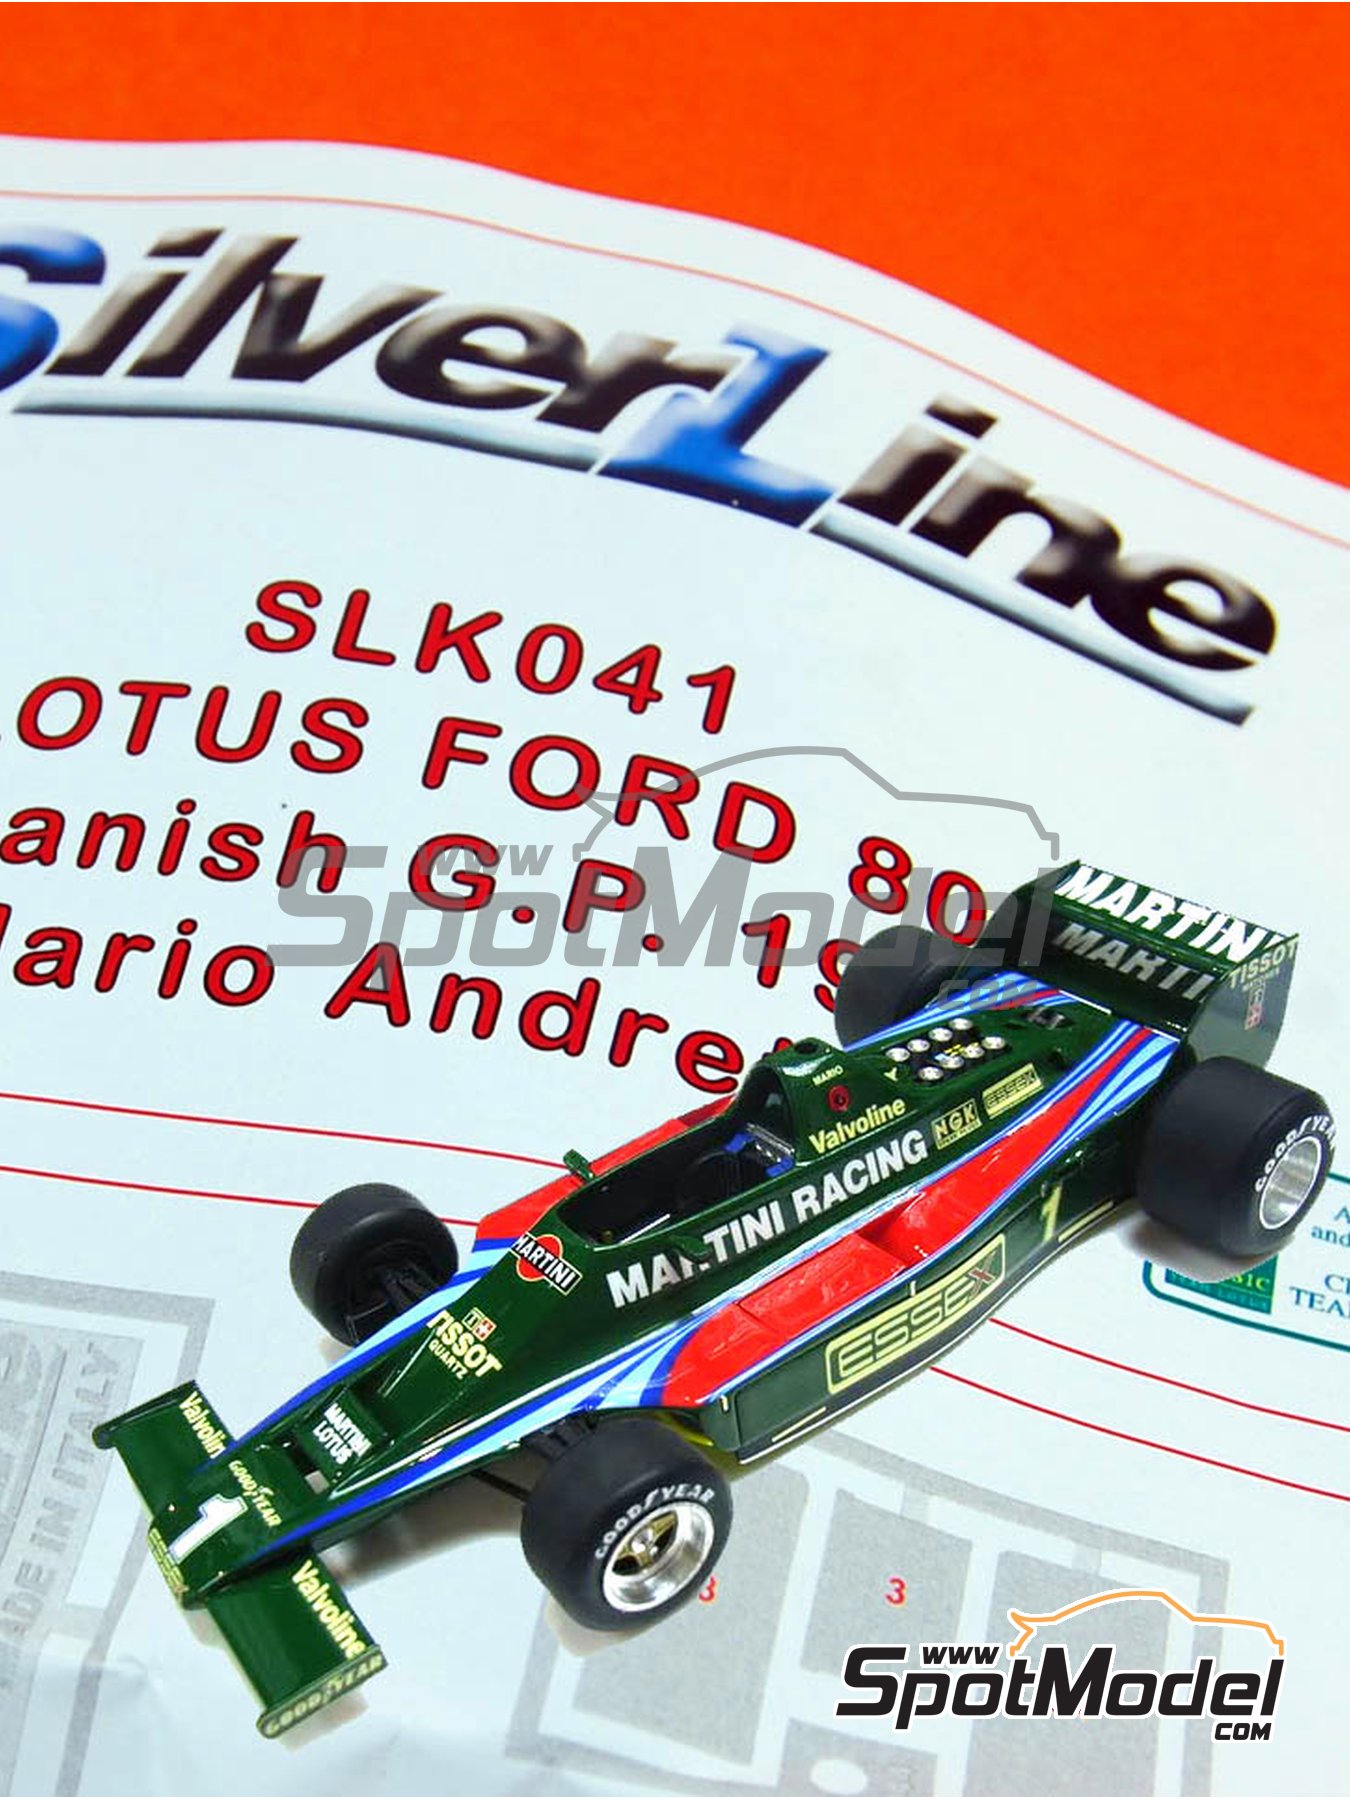 Lotus Ford 80 Lotus Team sponsored by Martini Racing - Spanish Formula 1  Grand Prix 1979. Car scale model kit in 1/43 scale manufactured by Tameo  Kits